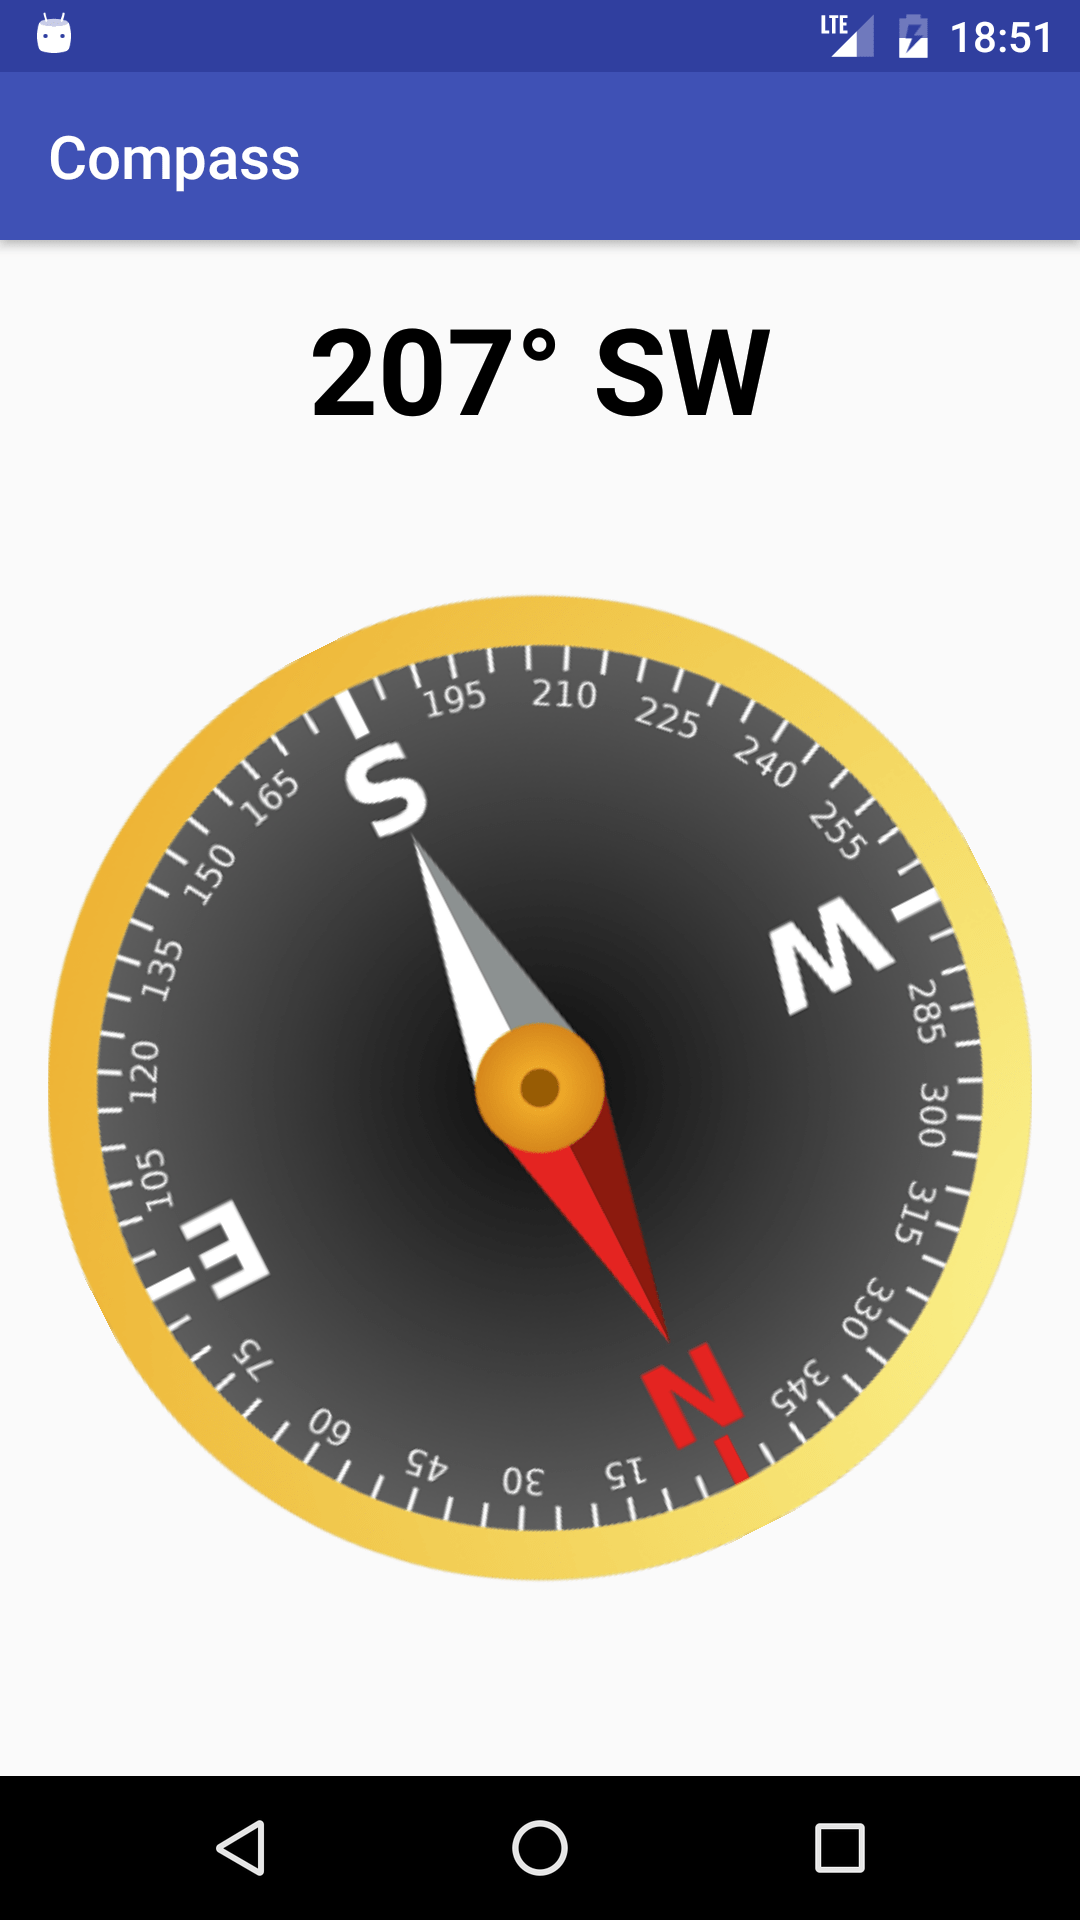 How-to create a Compass App - Wlsdevelop